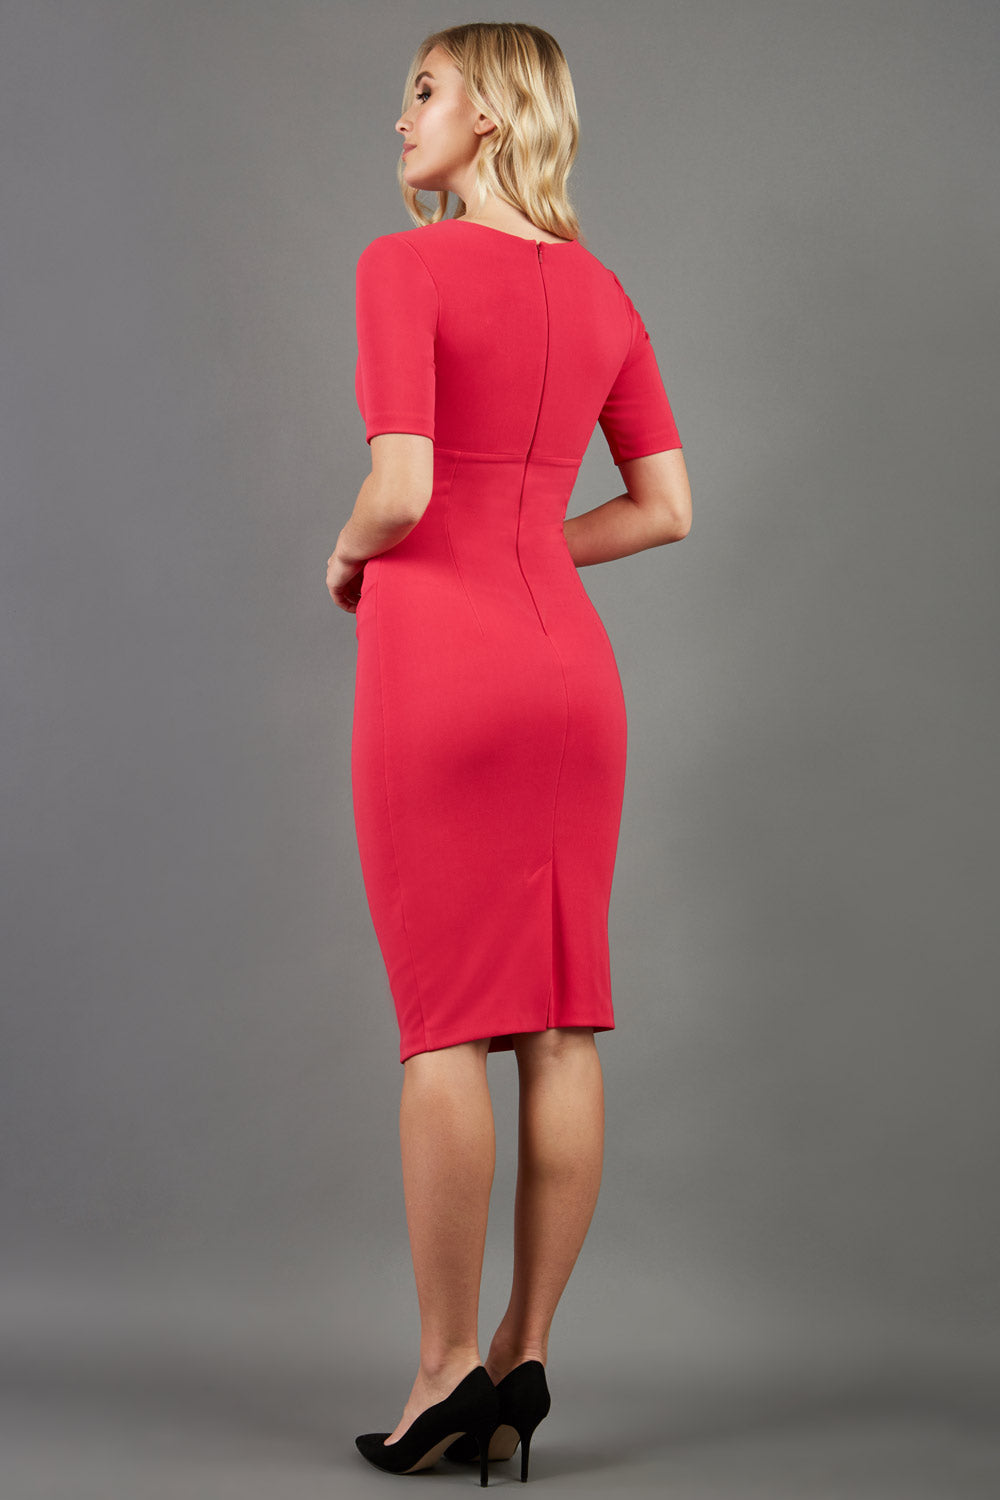 blonde model is wearing diva catwalk lydia short sleeve pencil fitted dress in paradise pink colour with rounded neckline with a slit in the middle back